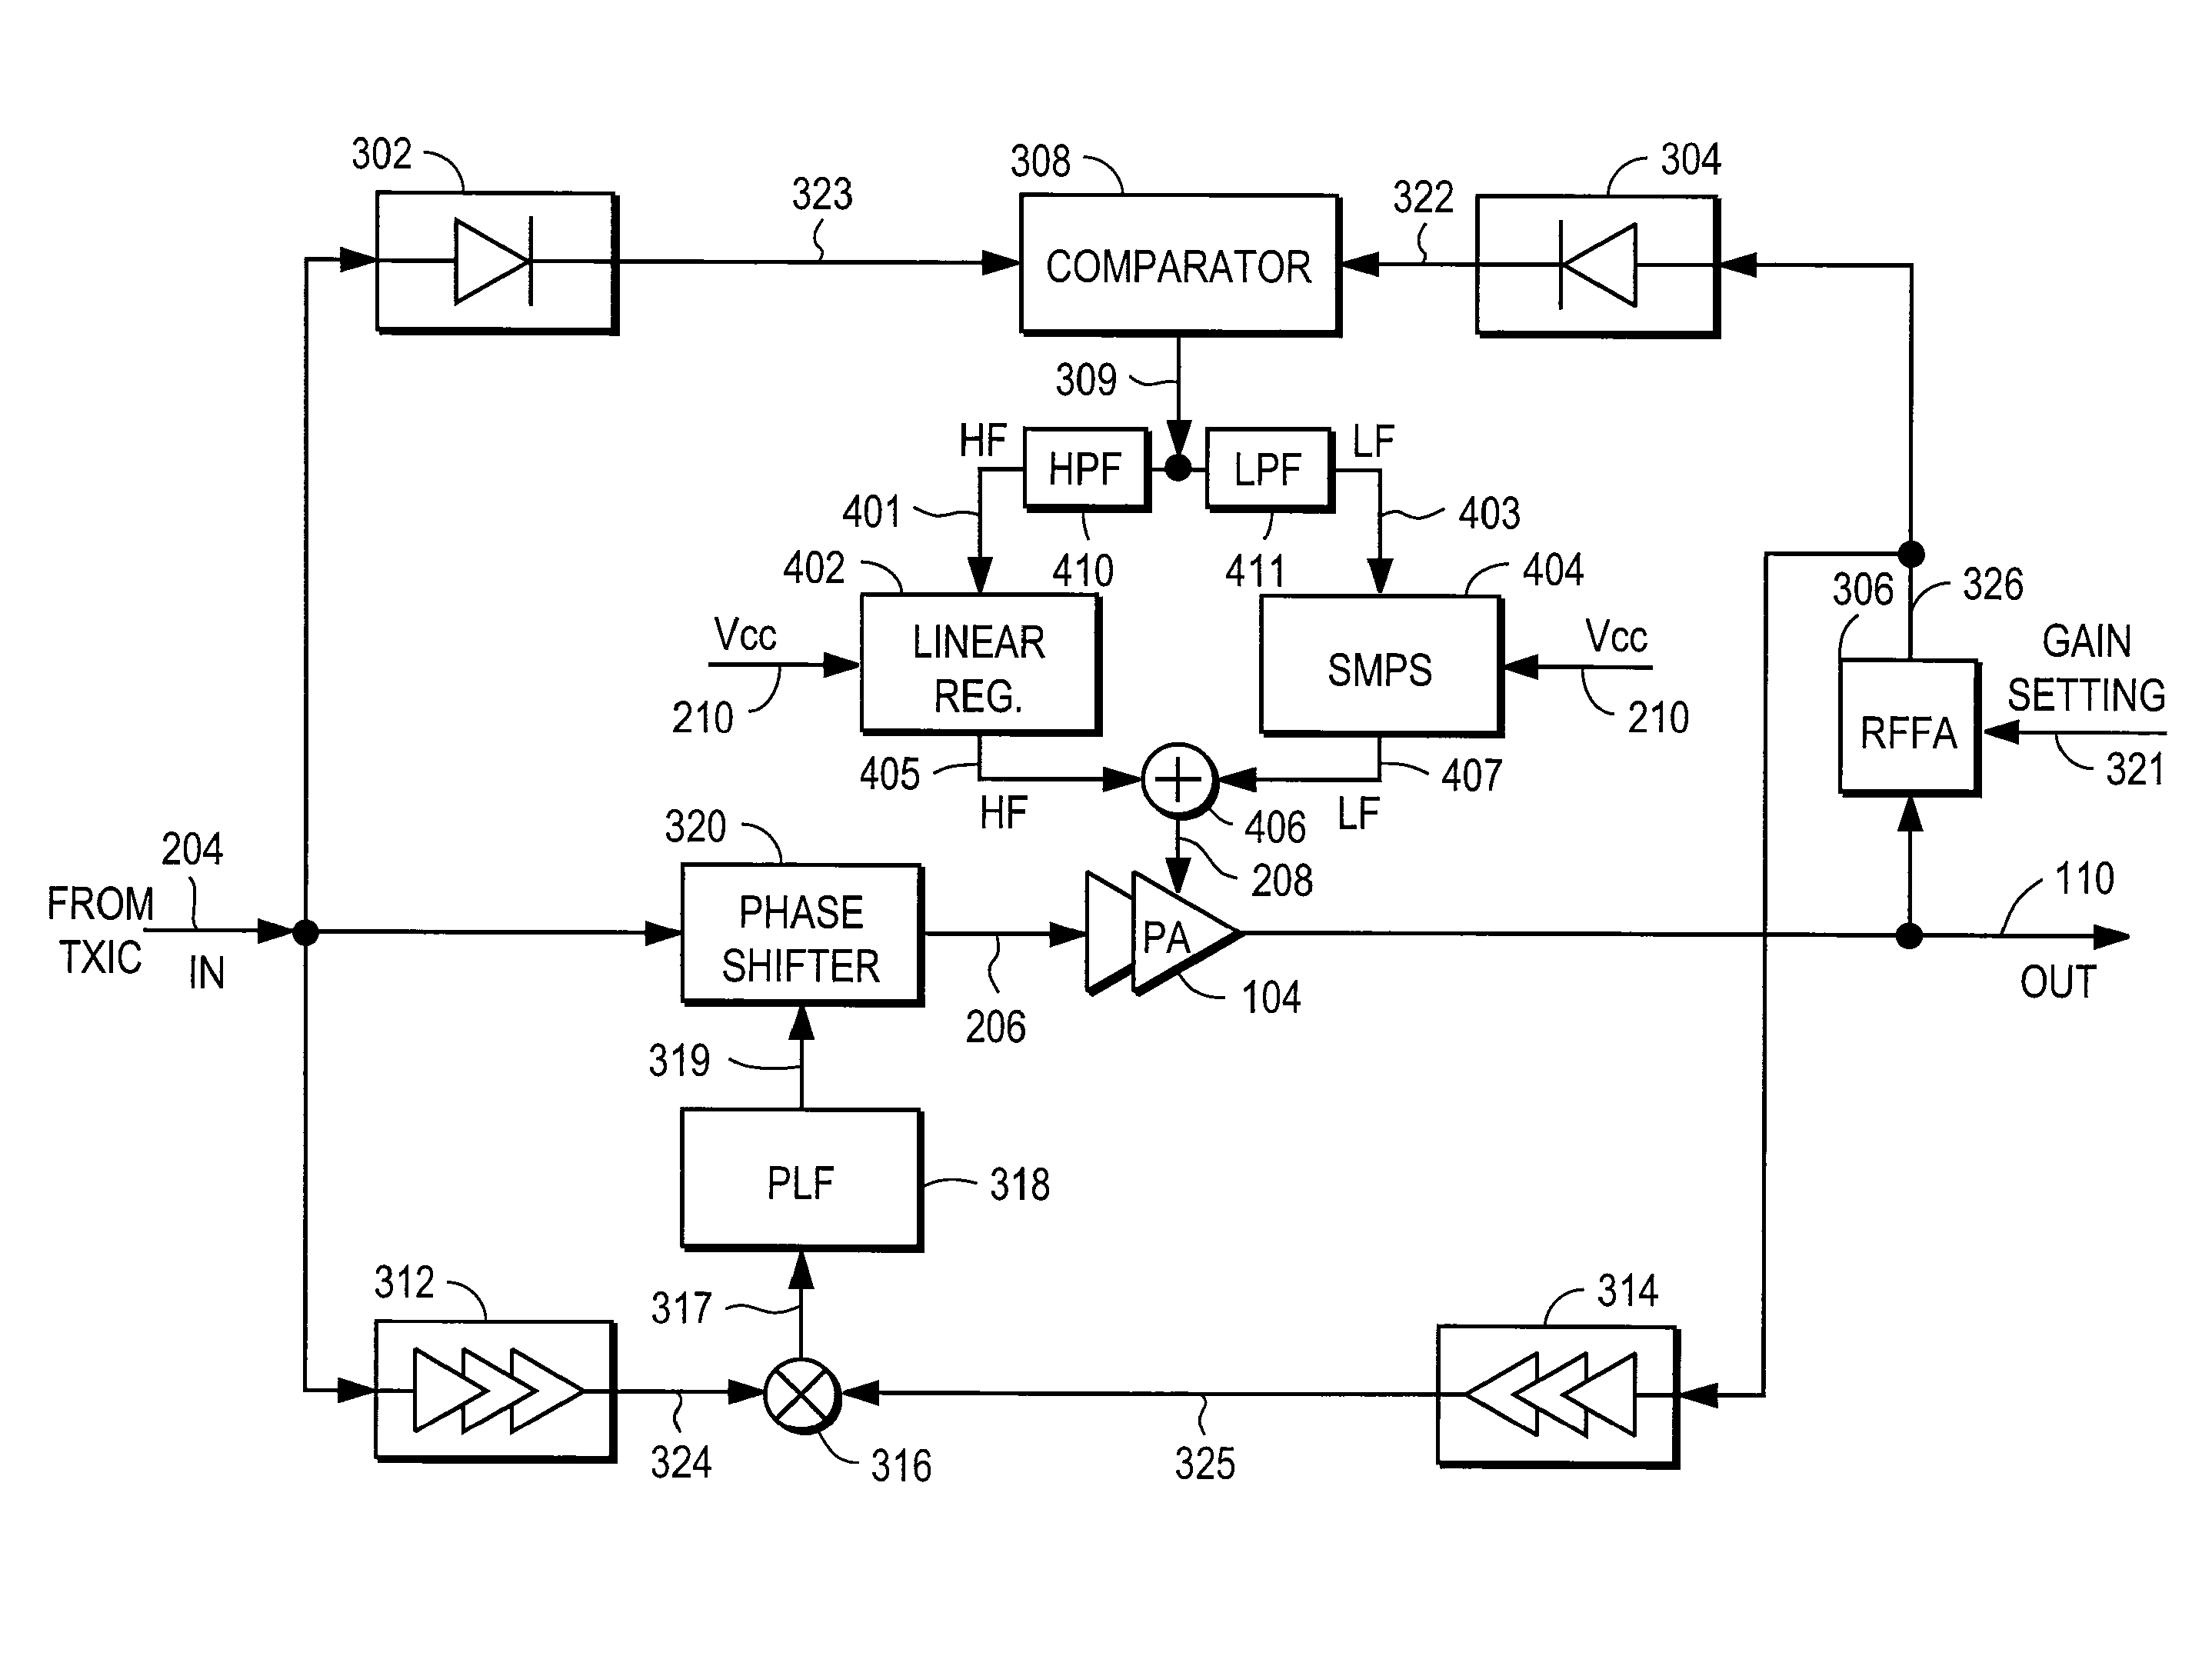 RF power amplifier controller circuit including calibrated phase control loop